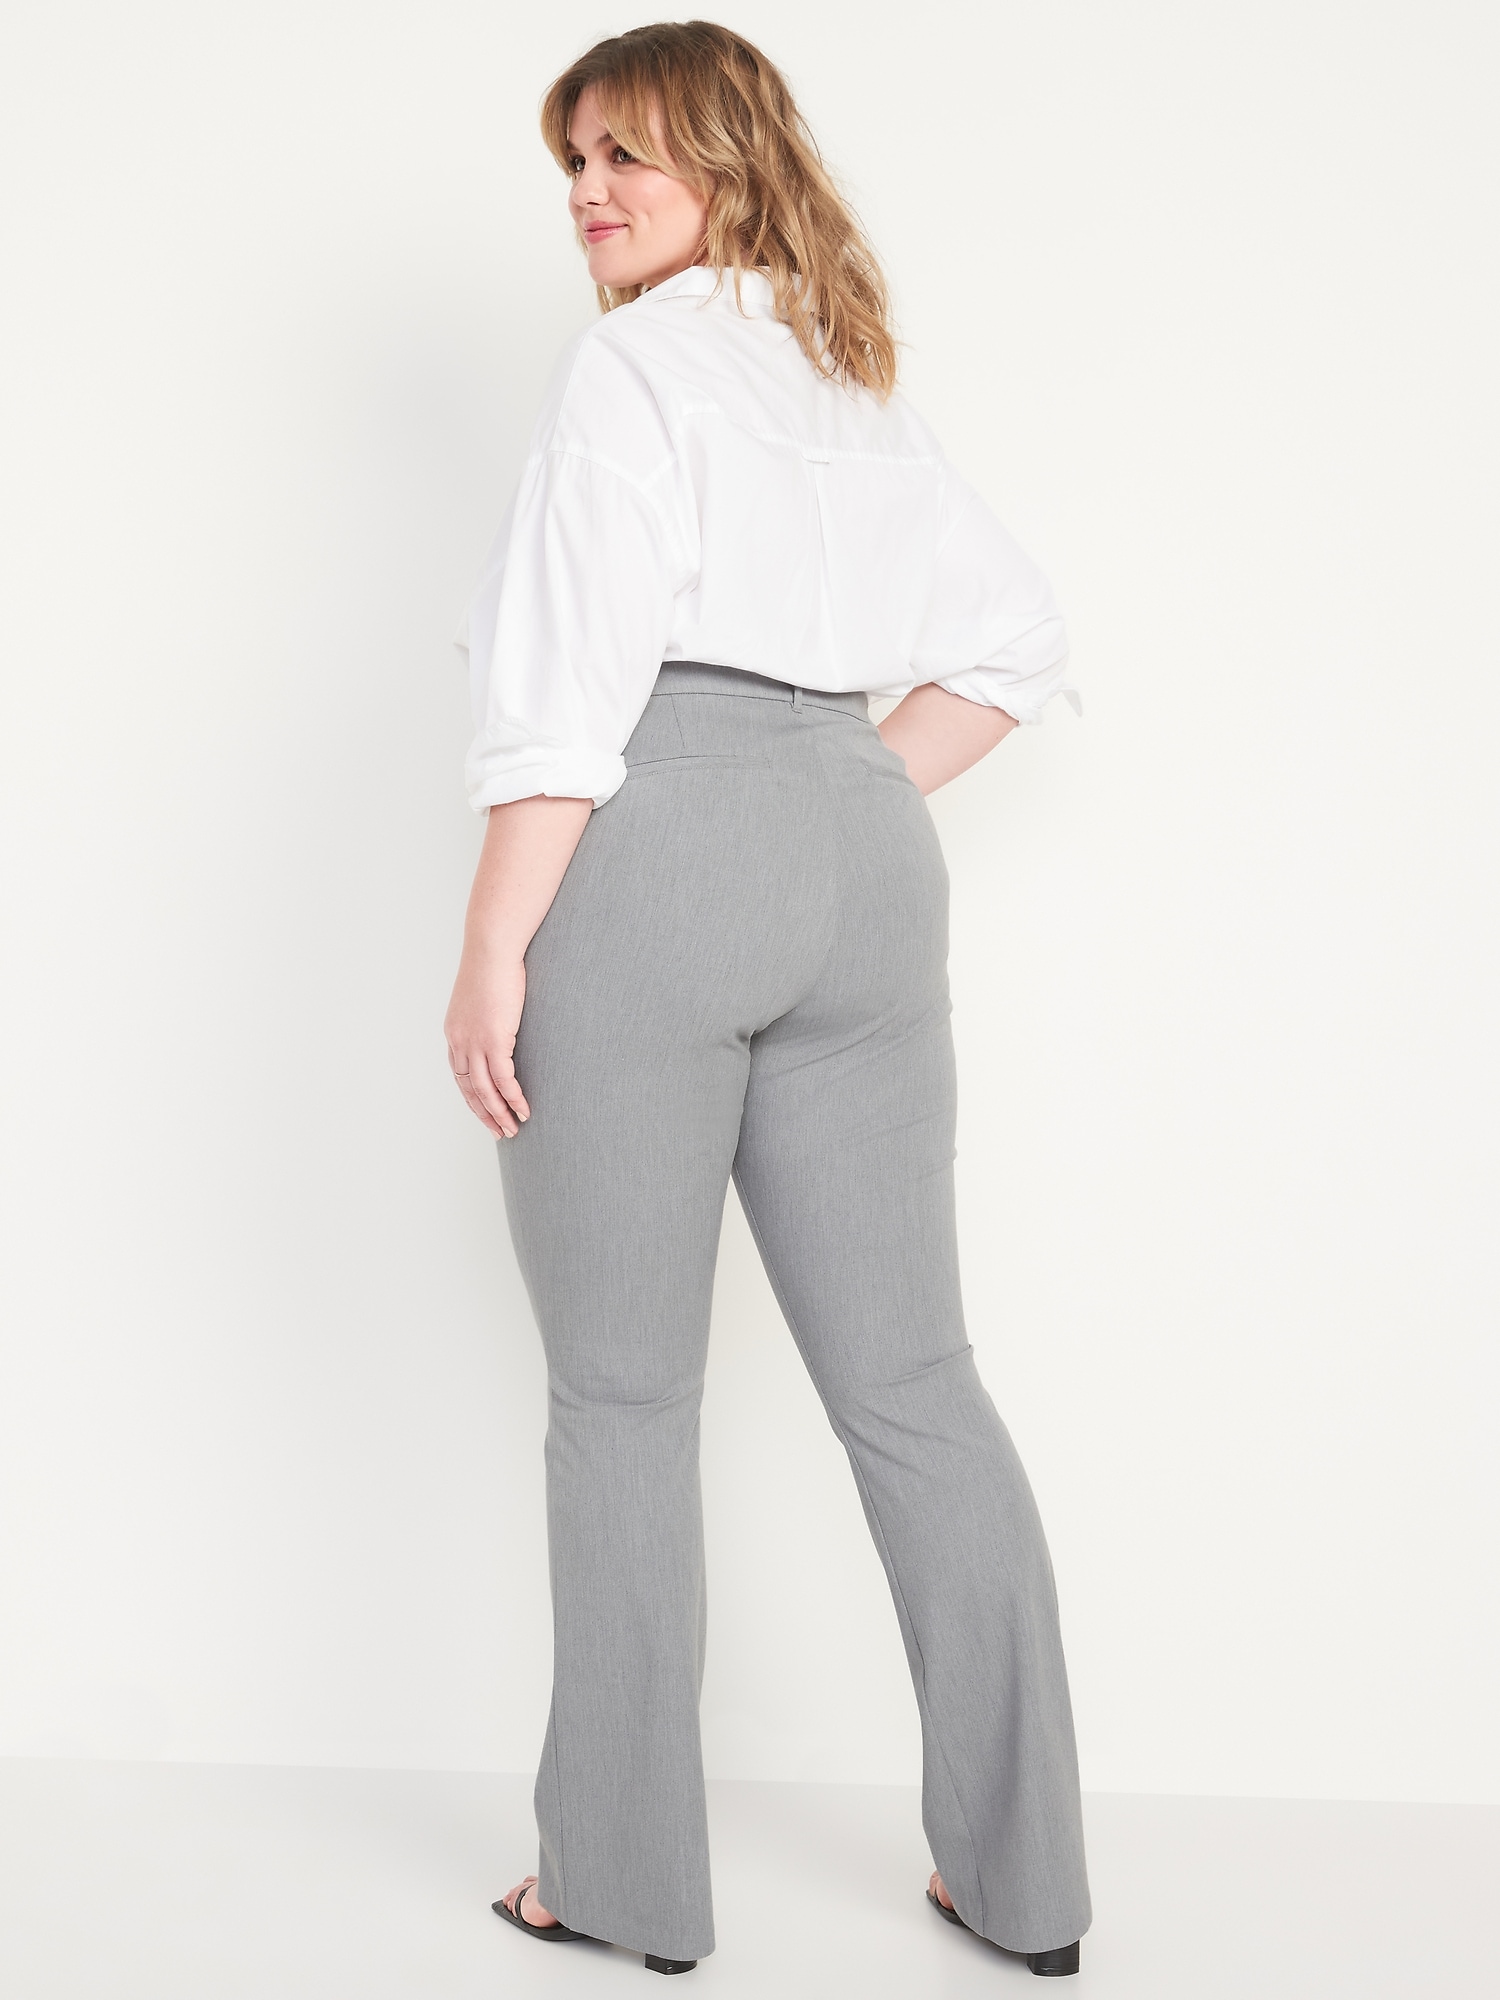 Buy Plussclub Women's Plus Size Flared Trousers with Pockets High Stretch  All Day Wear Pants (XL, Dark Grey) at Amazon.in